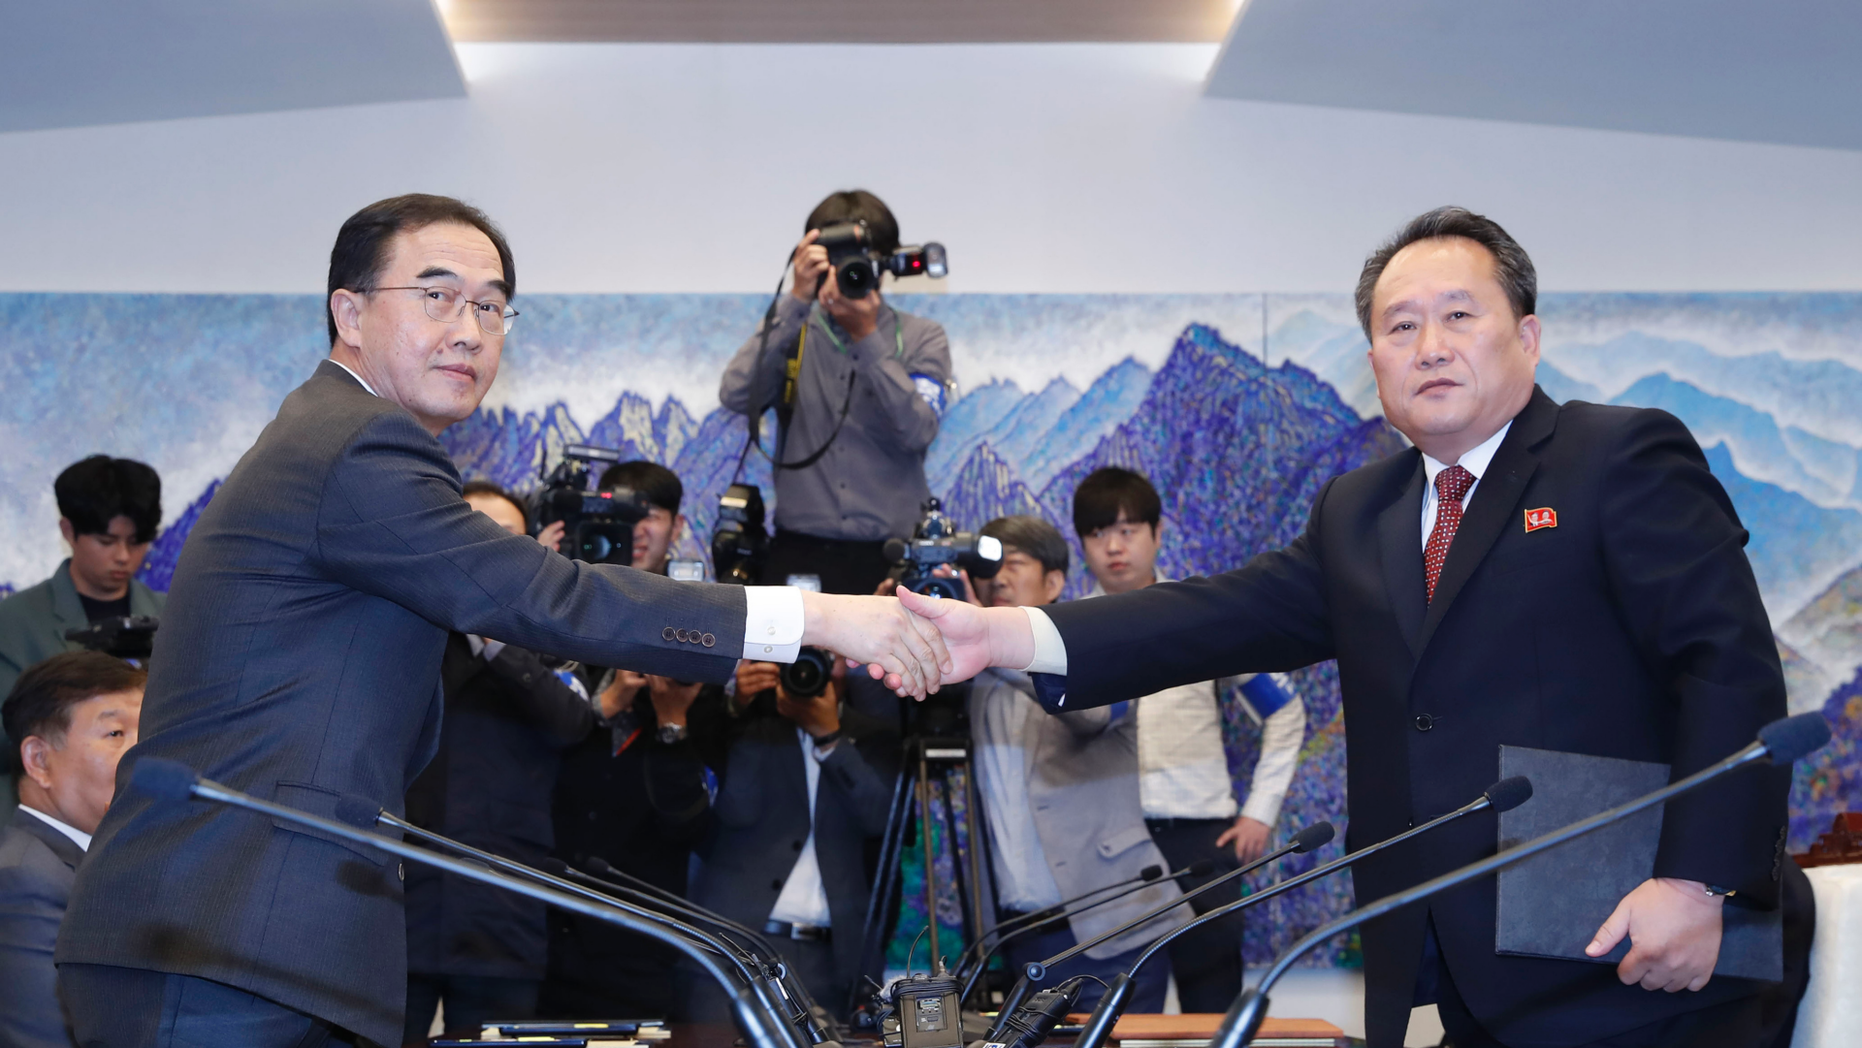 REPORT - In this photo of 15 October 2018, South Korean Unification Minister Cho Myoung-gyon, left, shakes hands with his North Korean counterpart, Ri Son Gwon, after exchanging the joint statement at their meeting south of Panmunjom in the Demilitarized Zone, South Korea. South Korea said the United Nations Security Council has granted a sanctions exemption for investigations into North Korean railway sections that the Koreas want to link to the South. (Korea Pool / Yonhap via AP, File)